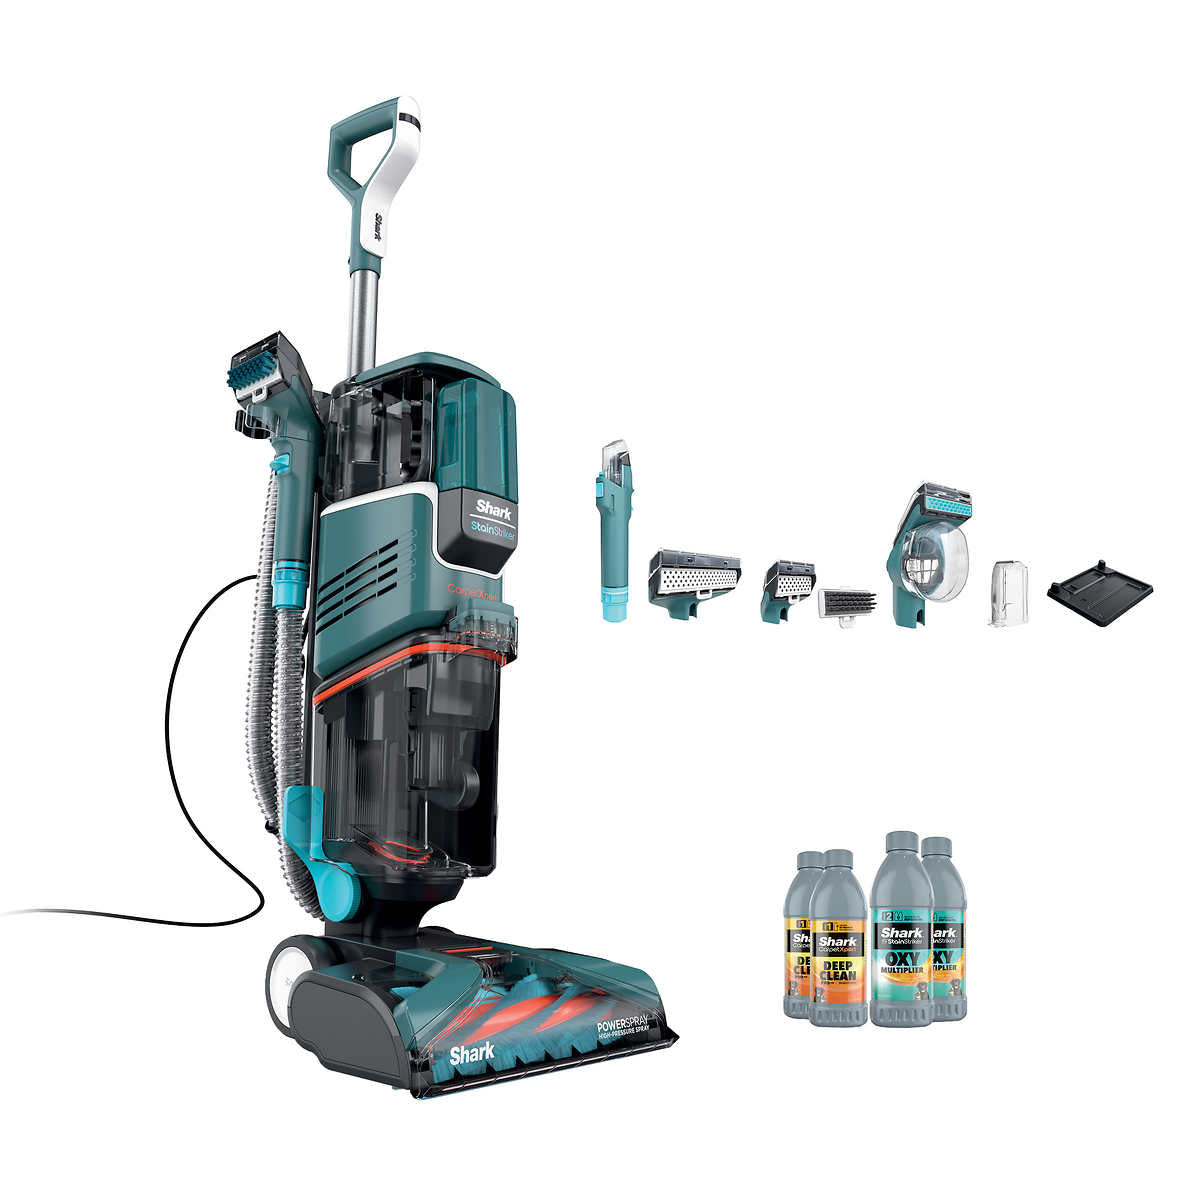 Shark R-EX205 CarpetXpert Upright Vacuum for Carpet, Rugs & Upholstery with StainStriker, Spot & Stain Cleaner, Teal - Certified Refurbished